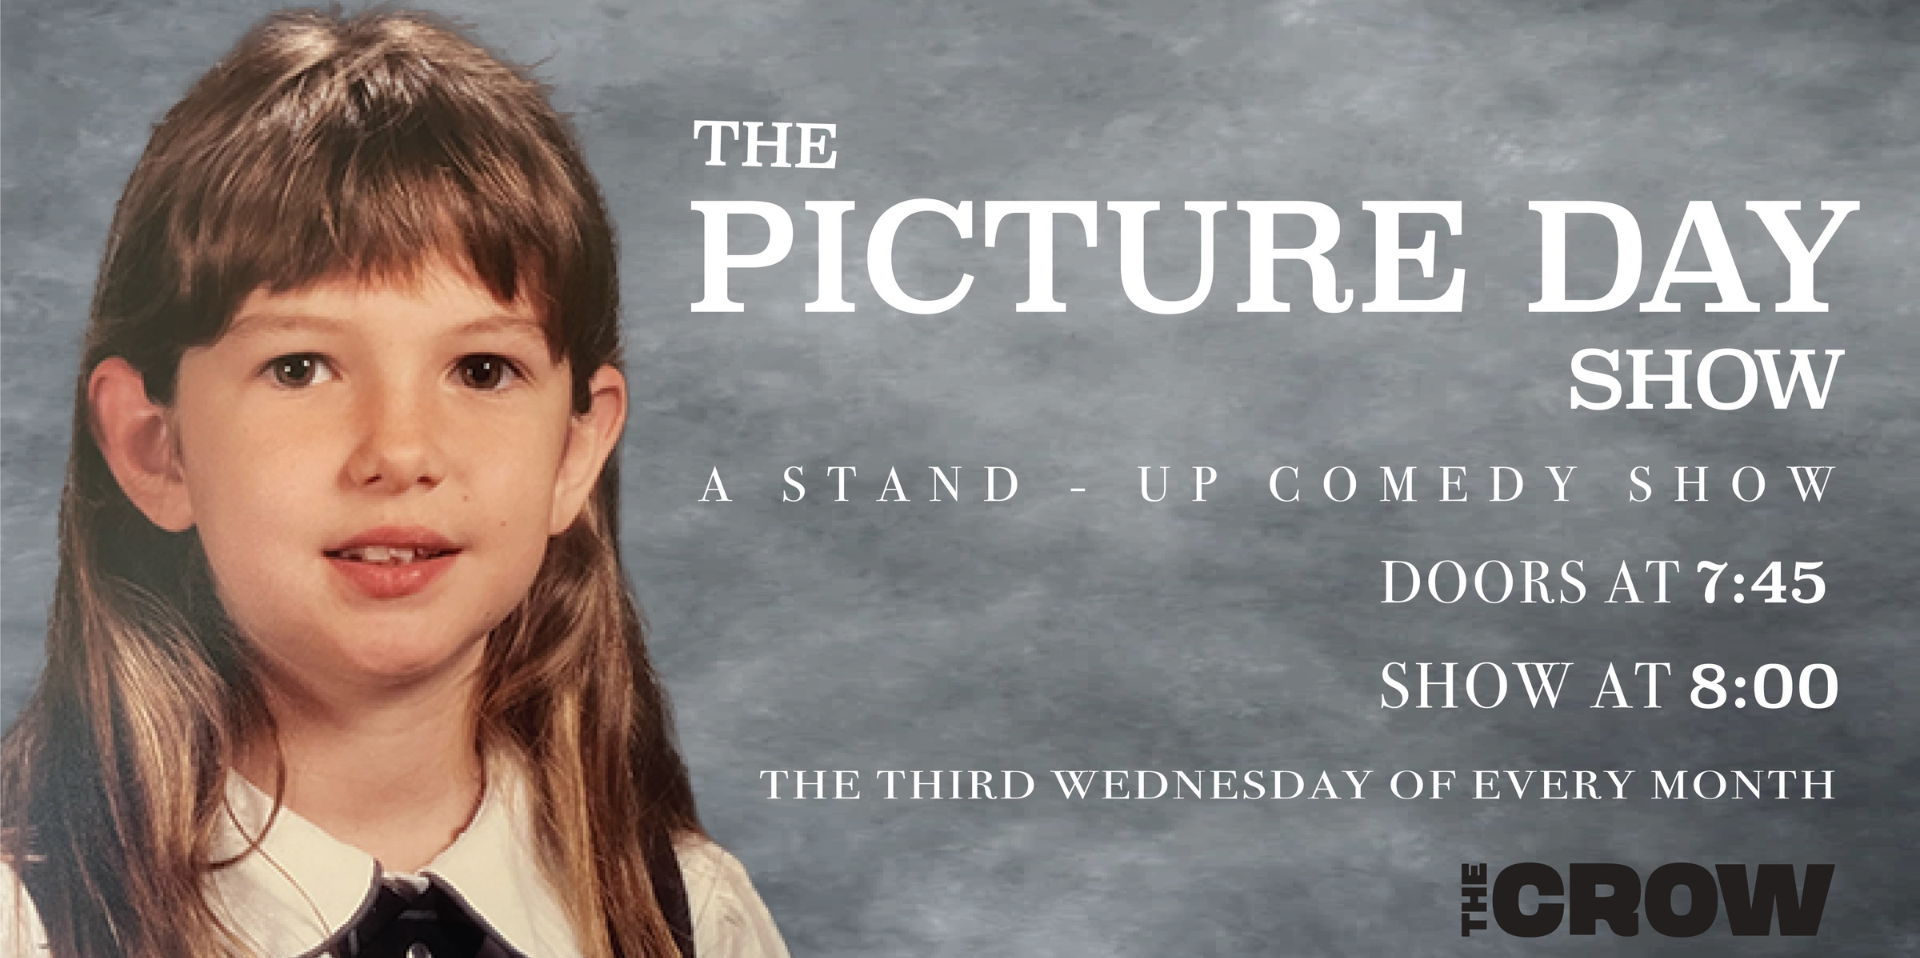 The Picture Day Show: A Stand-Up Comedy Show promotional image